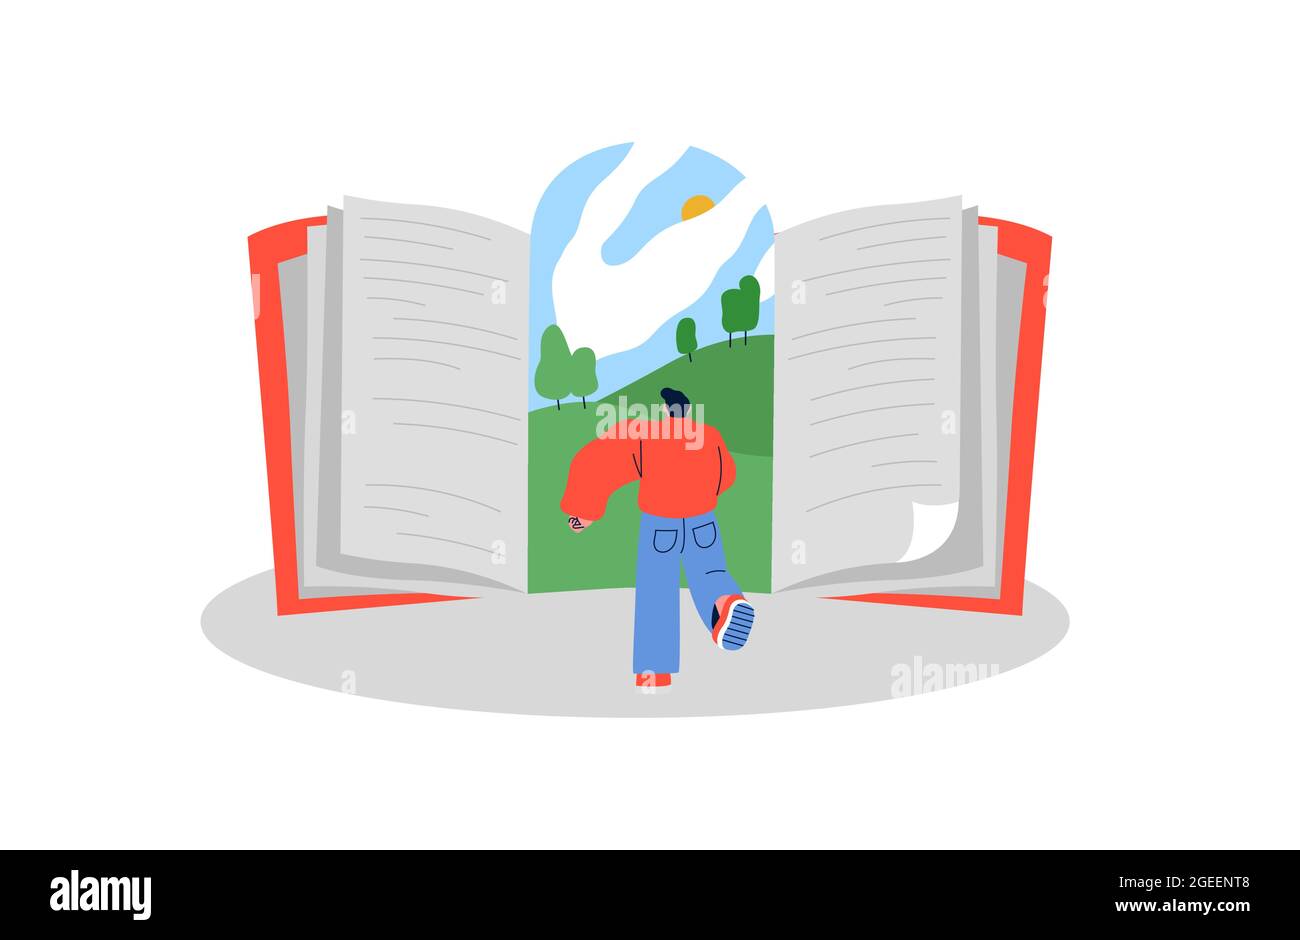 Young man character running to open book door of imagination landscape. Creative reading concept in flat cartoon style. Isolated education design. Stock Vector